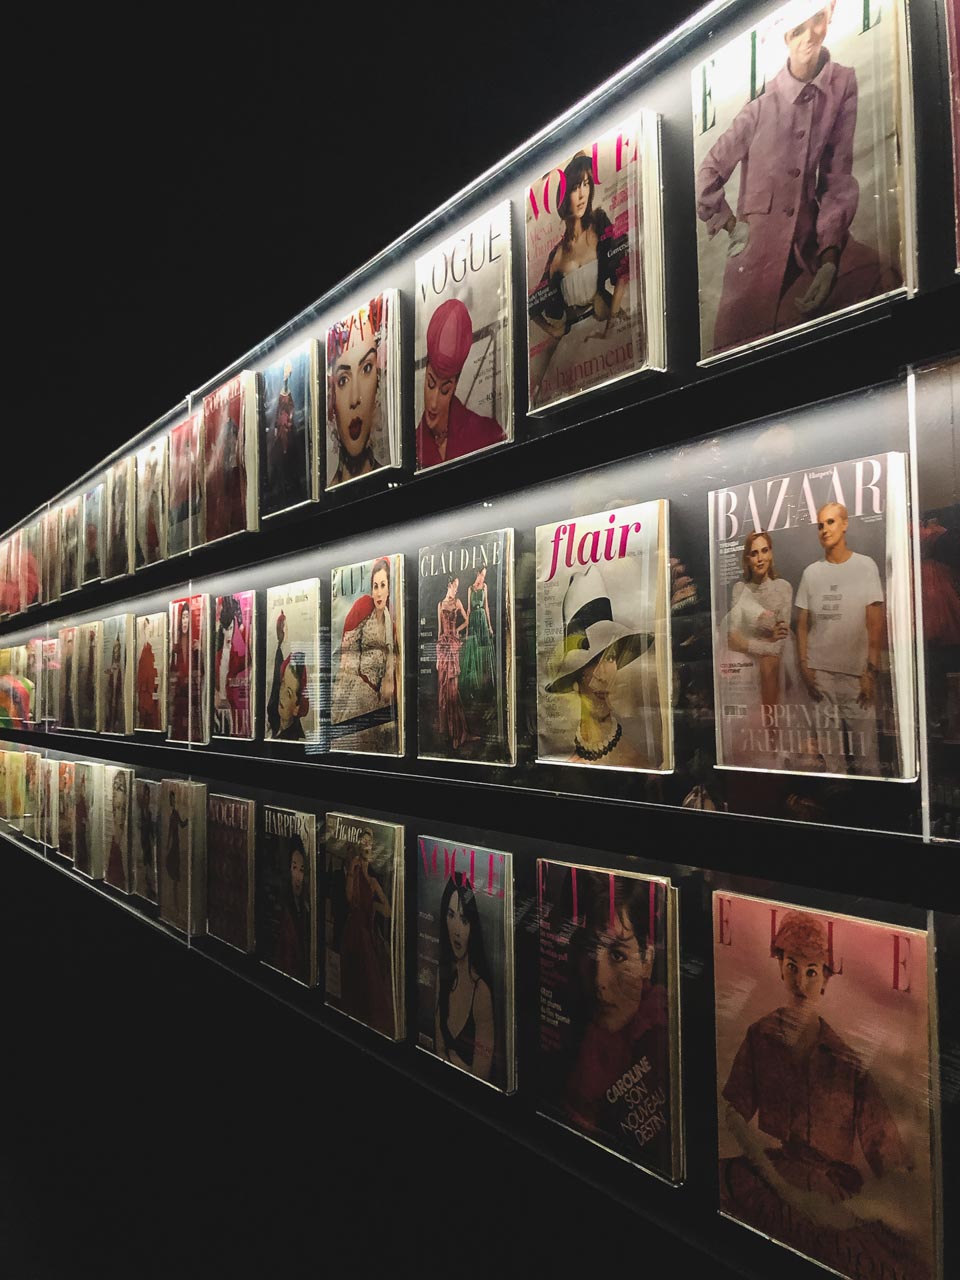 Magazine covers featuring Dior looks at the Victoria and Albert Museum in London